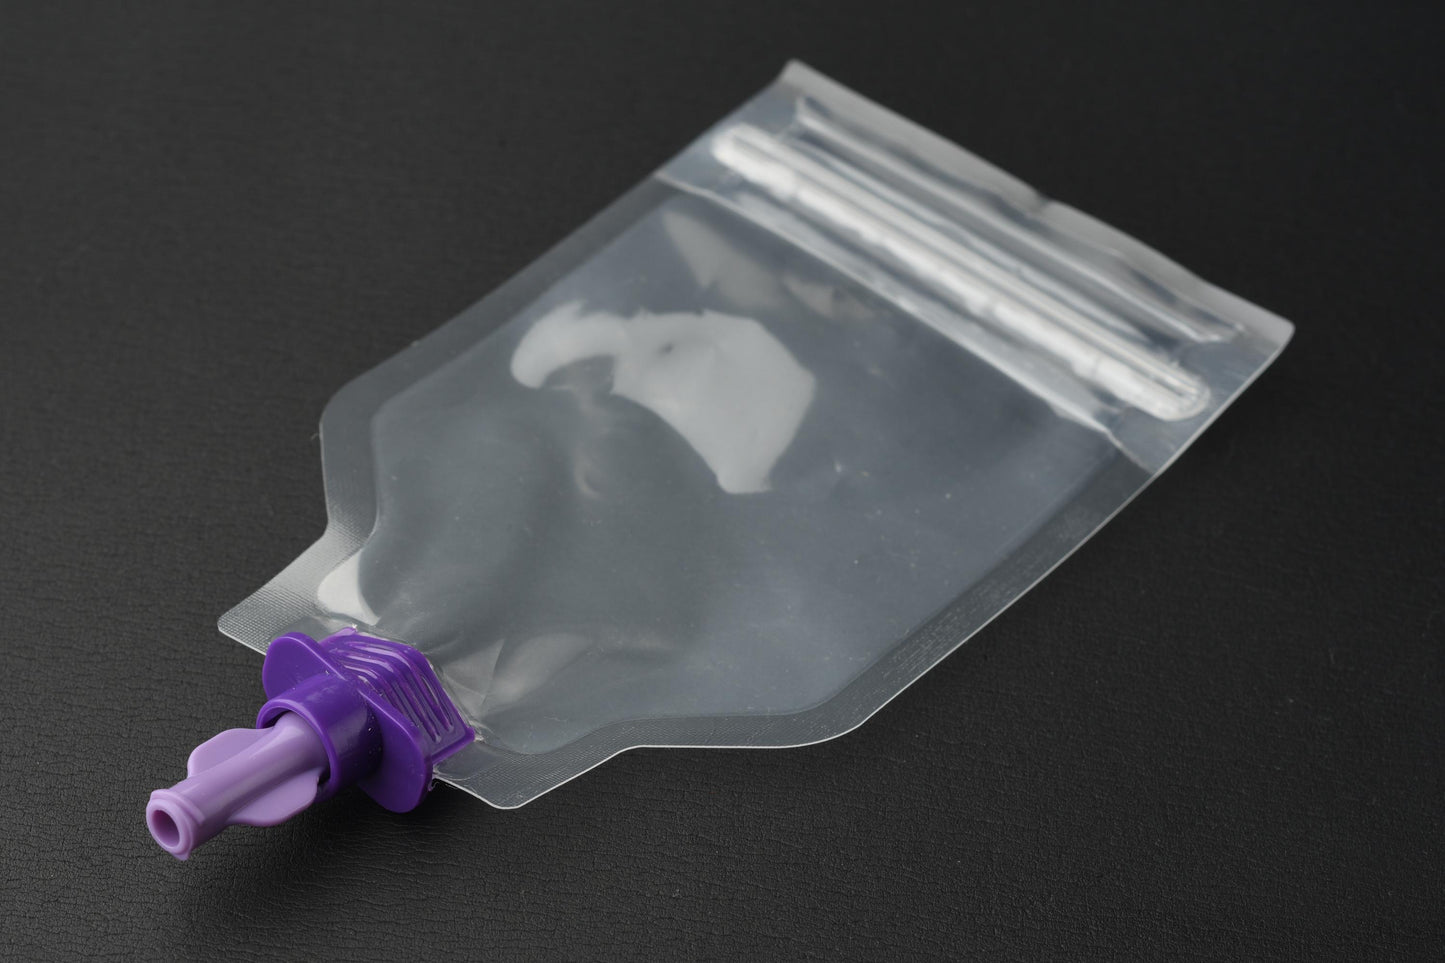 Locking ENFit Connecting Pill Pouch to Leur Syringe